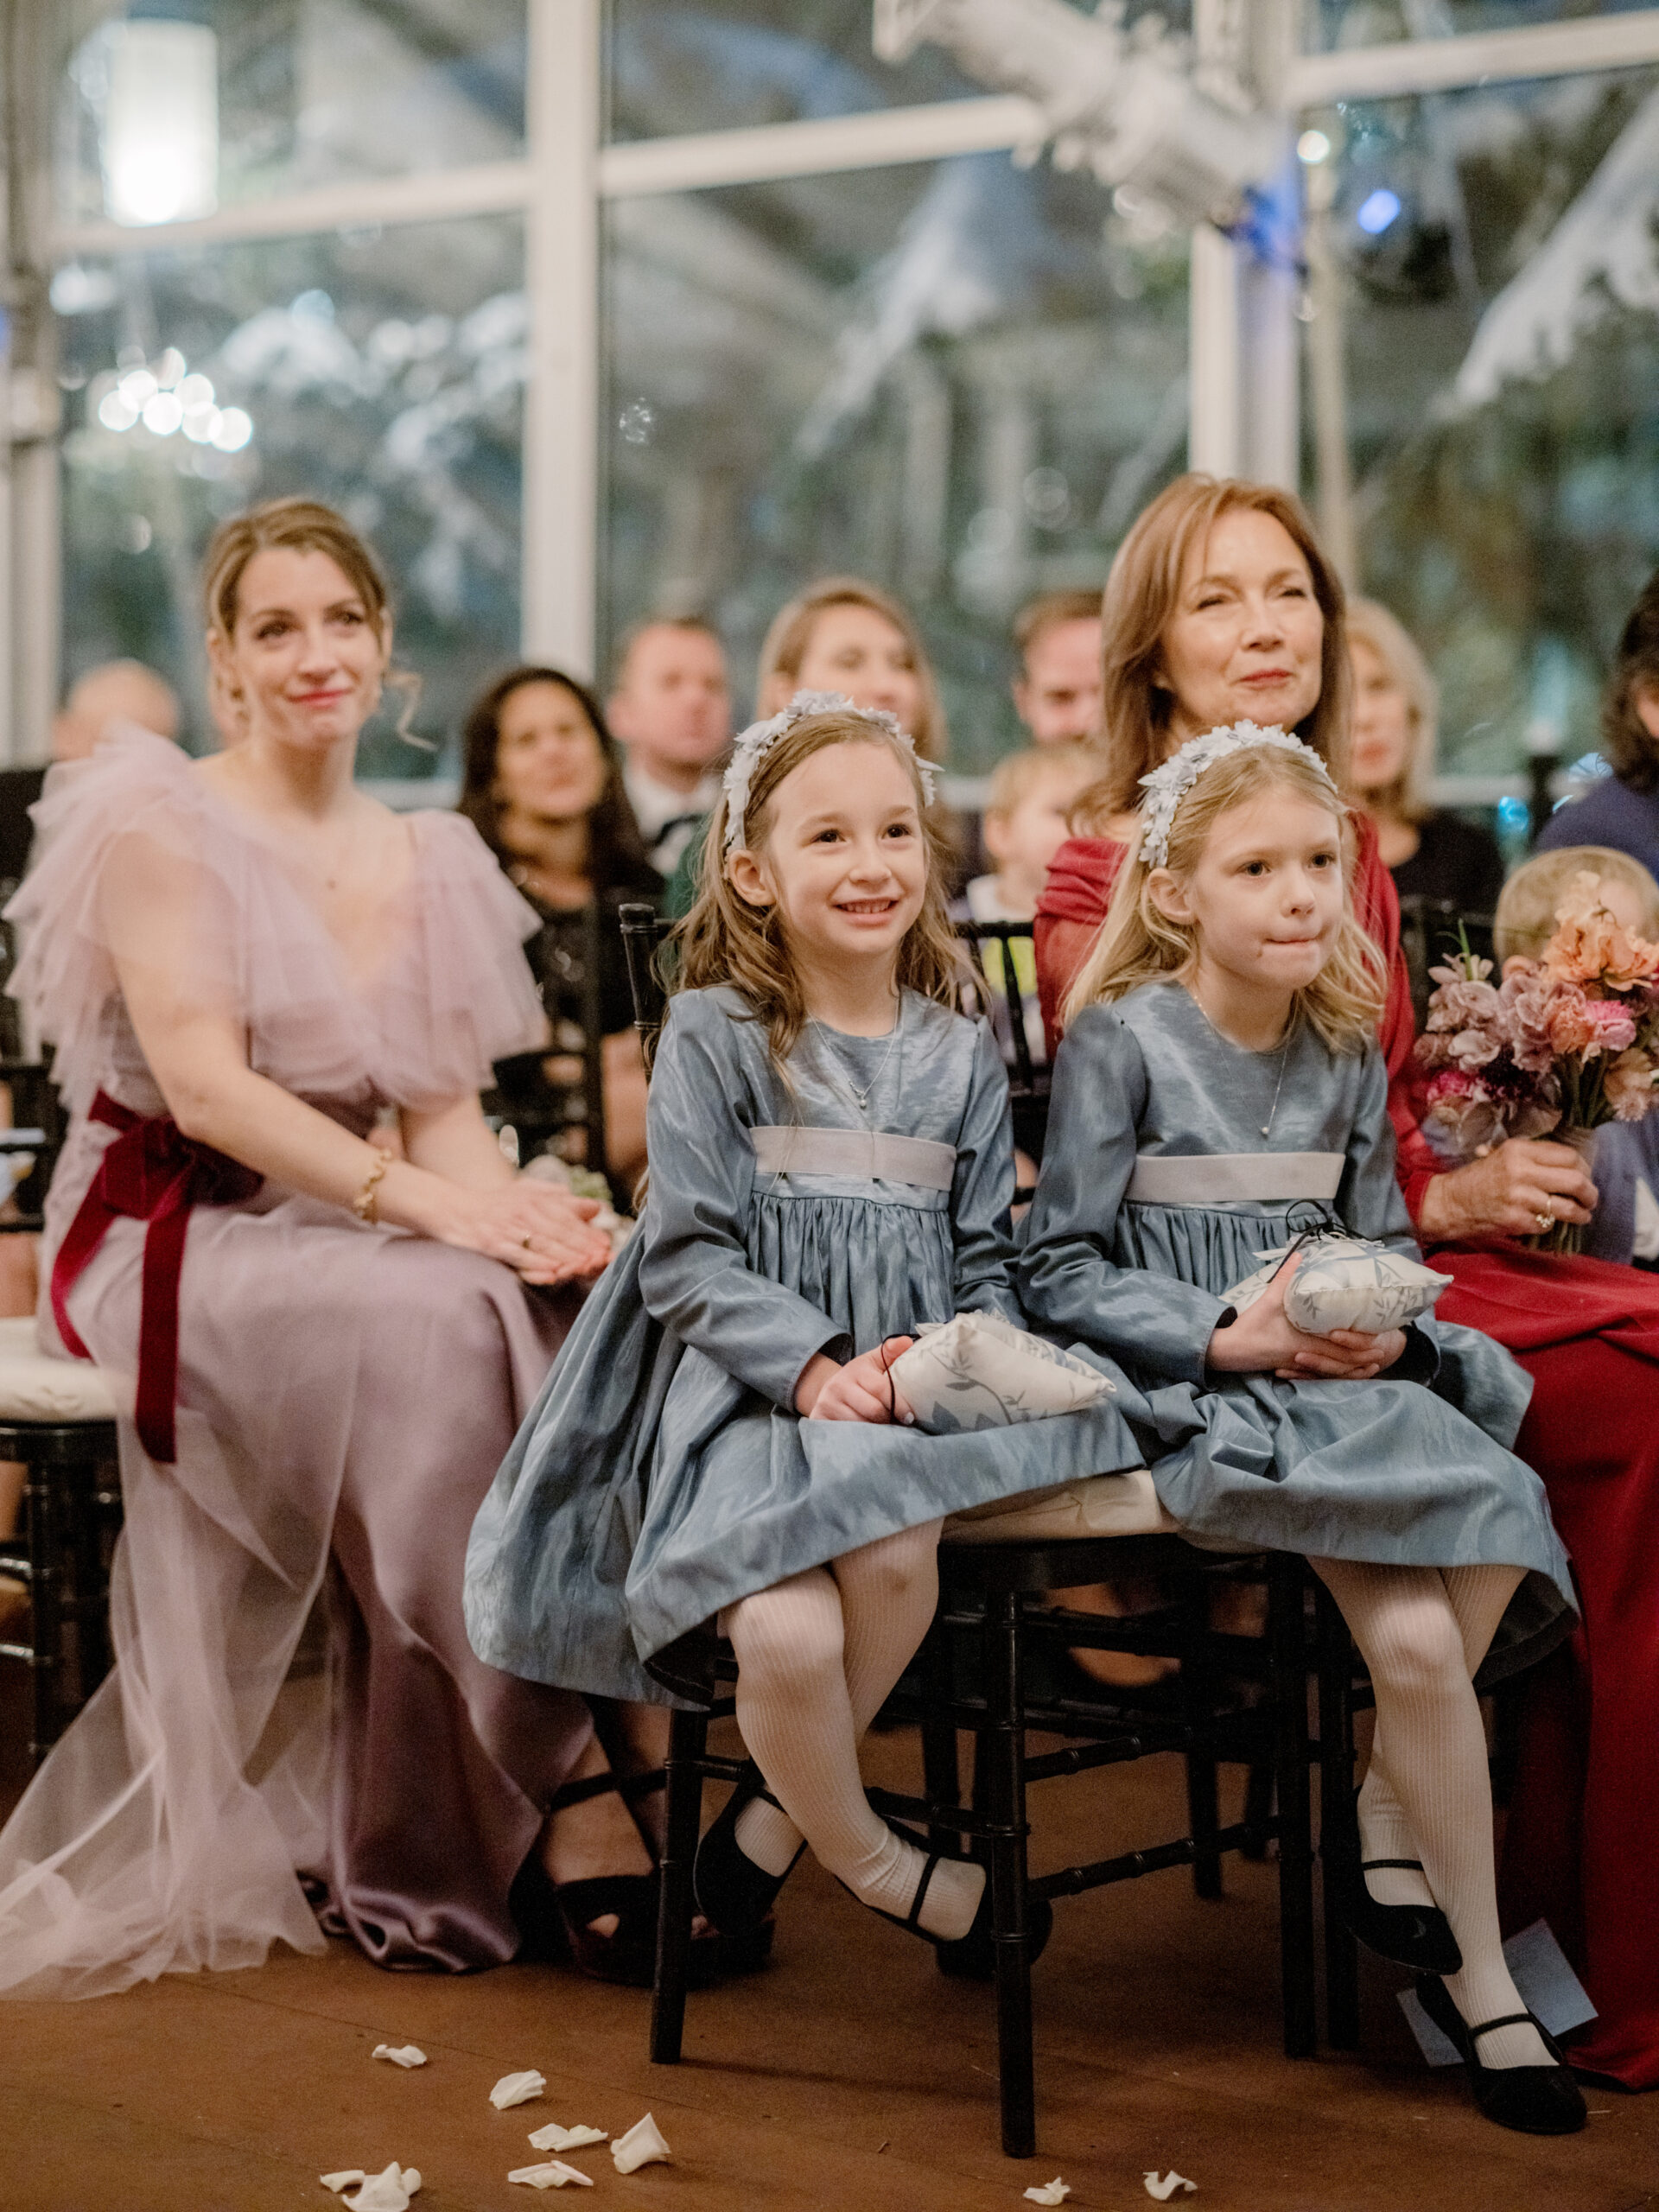 The bride's family are happily watching the wedding ceremony. Image by Jenny Fu Studio